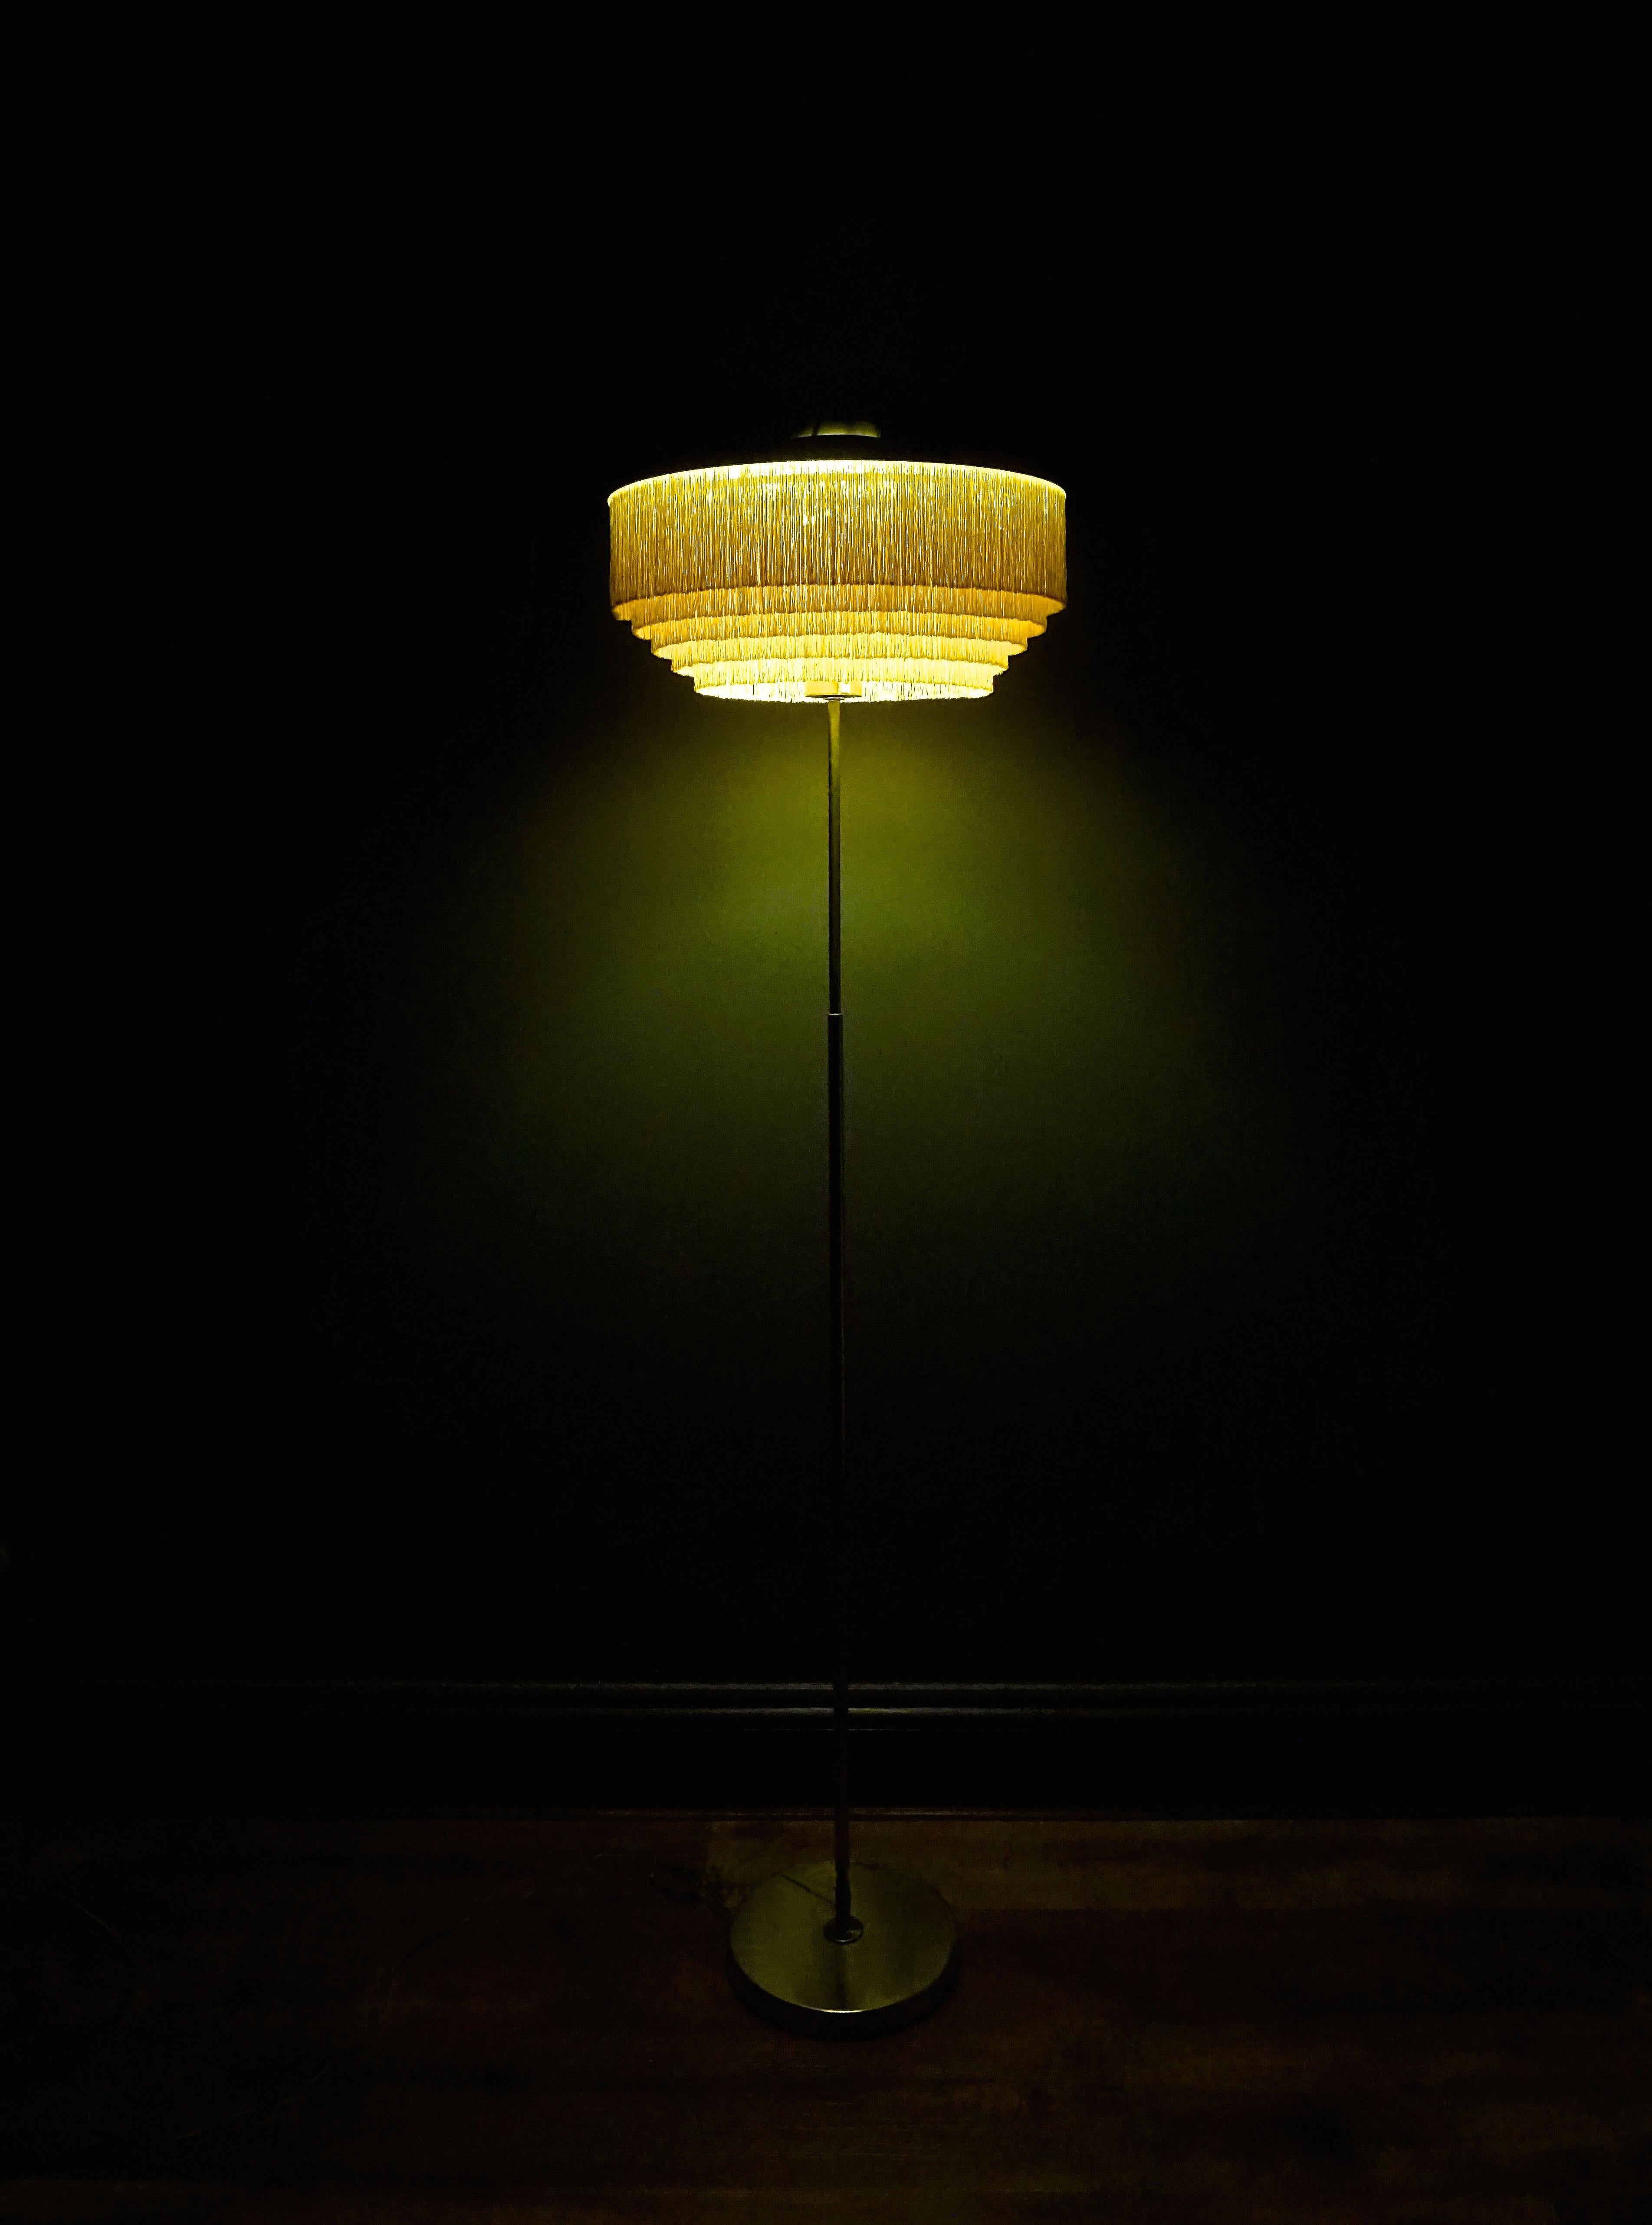 This floor lamp, model G-110, was designed by Hans-Agne Jakobsson and produced by Hans-Agne Jakobsson in Markaryd, Sweden.
- Brass and fringes
- circa 1960s.
- midcentury, Scandinavian
- Dimensions: H 137 x W 39cm diameter.